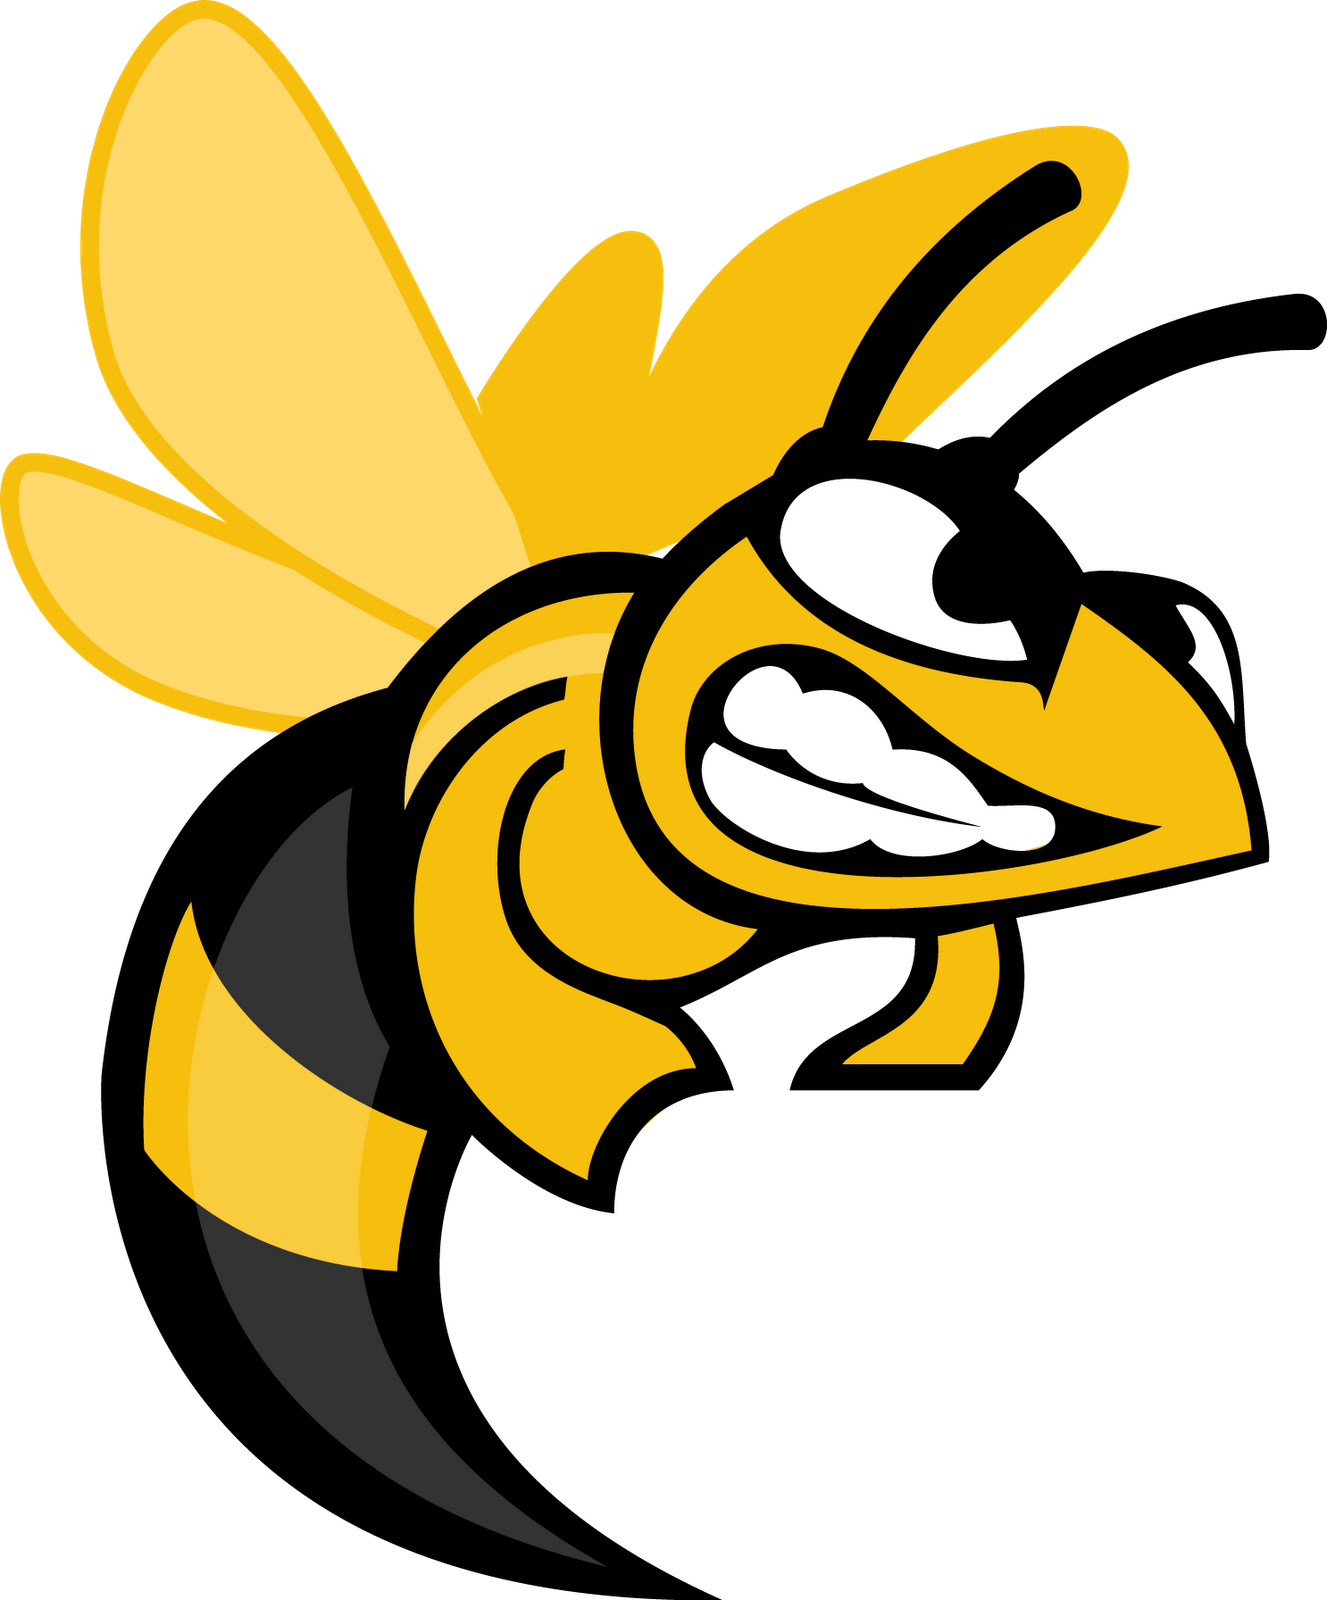 Angry Hornet Cartoon Clipart PNG Image